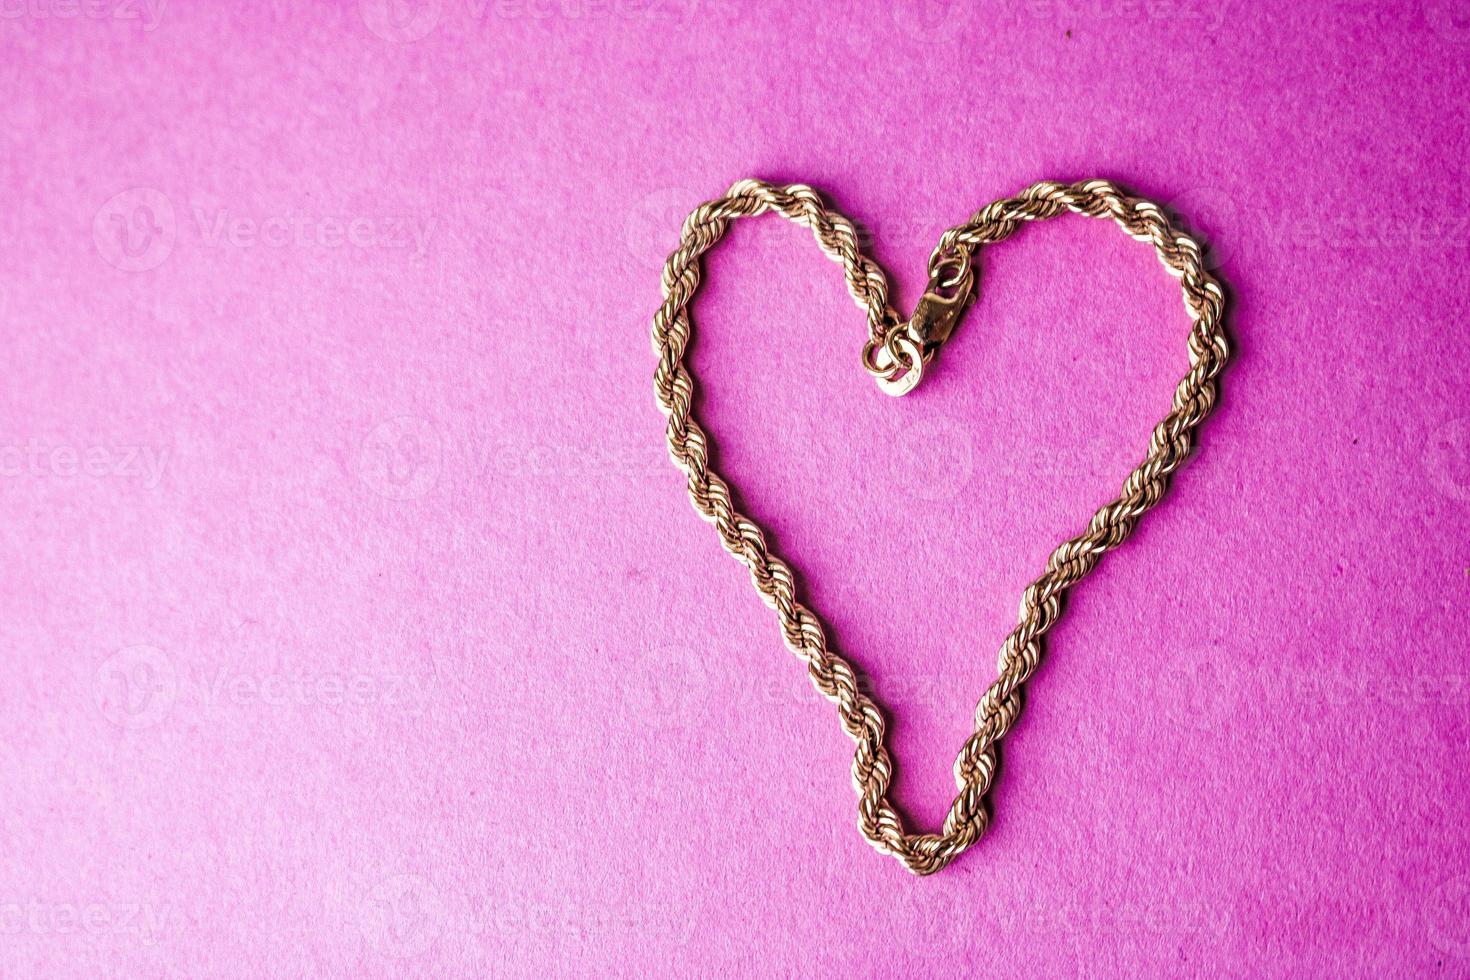 Texture of a beautiful golden festive chain unique weaving in the shape of a heart on a pink purple background and copy space. Concept love, marriage proposal, marriage, St. Valentine's Day photo